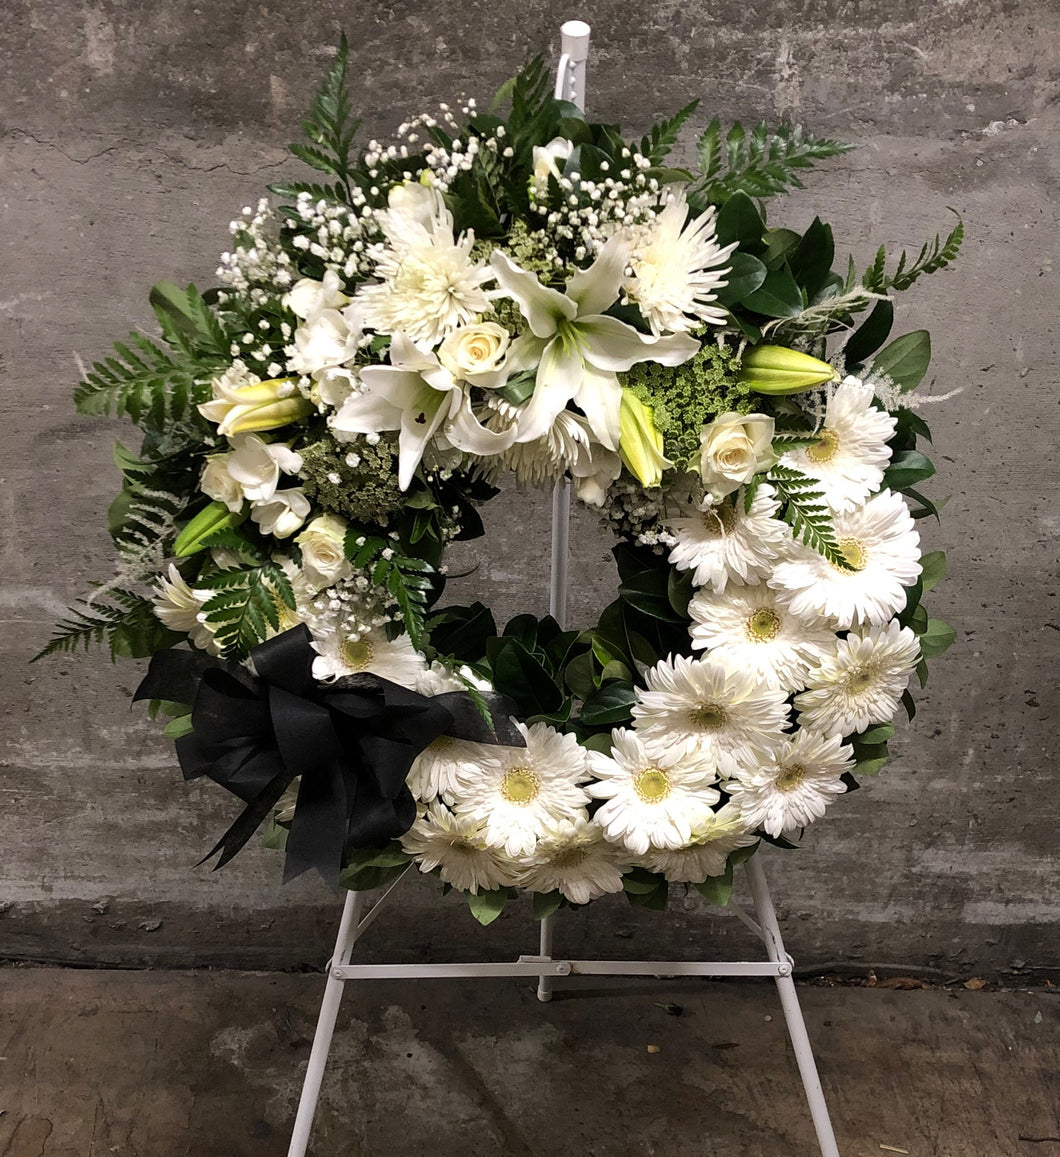 Classical white funeral wreath